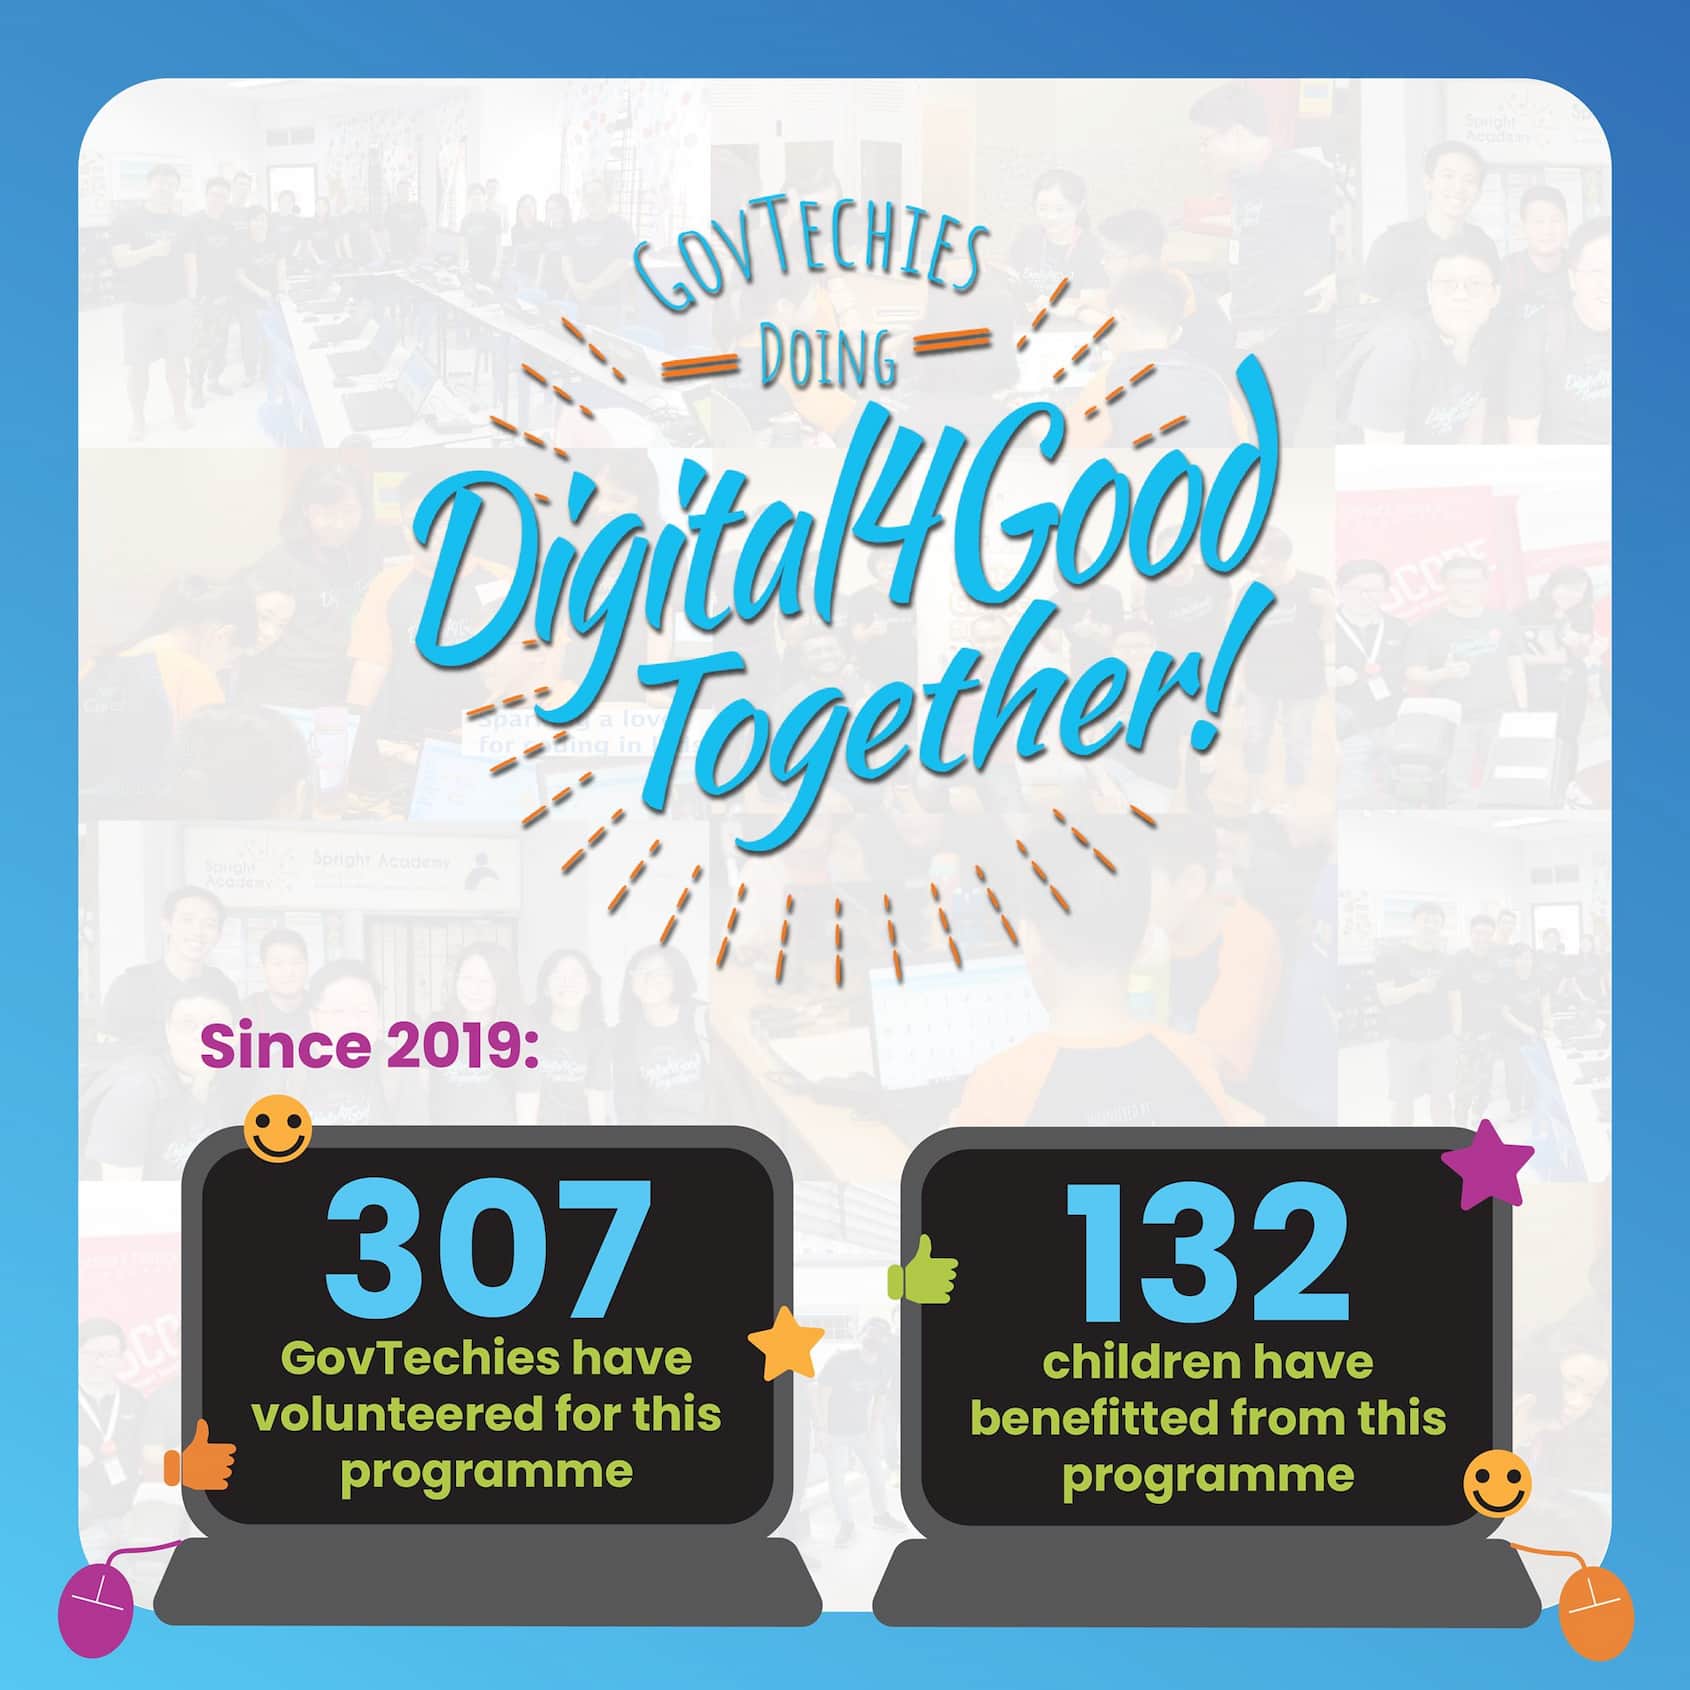 Digital4Good:Since 2019, 307 GovTechies have volunteered and 132 children have benefitted from this